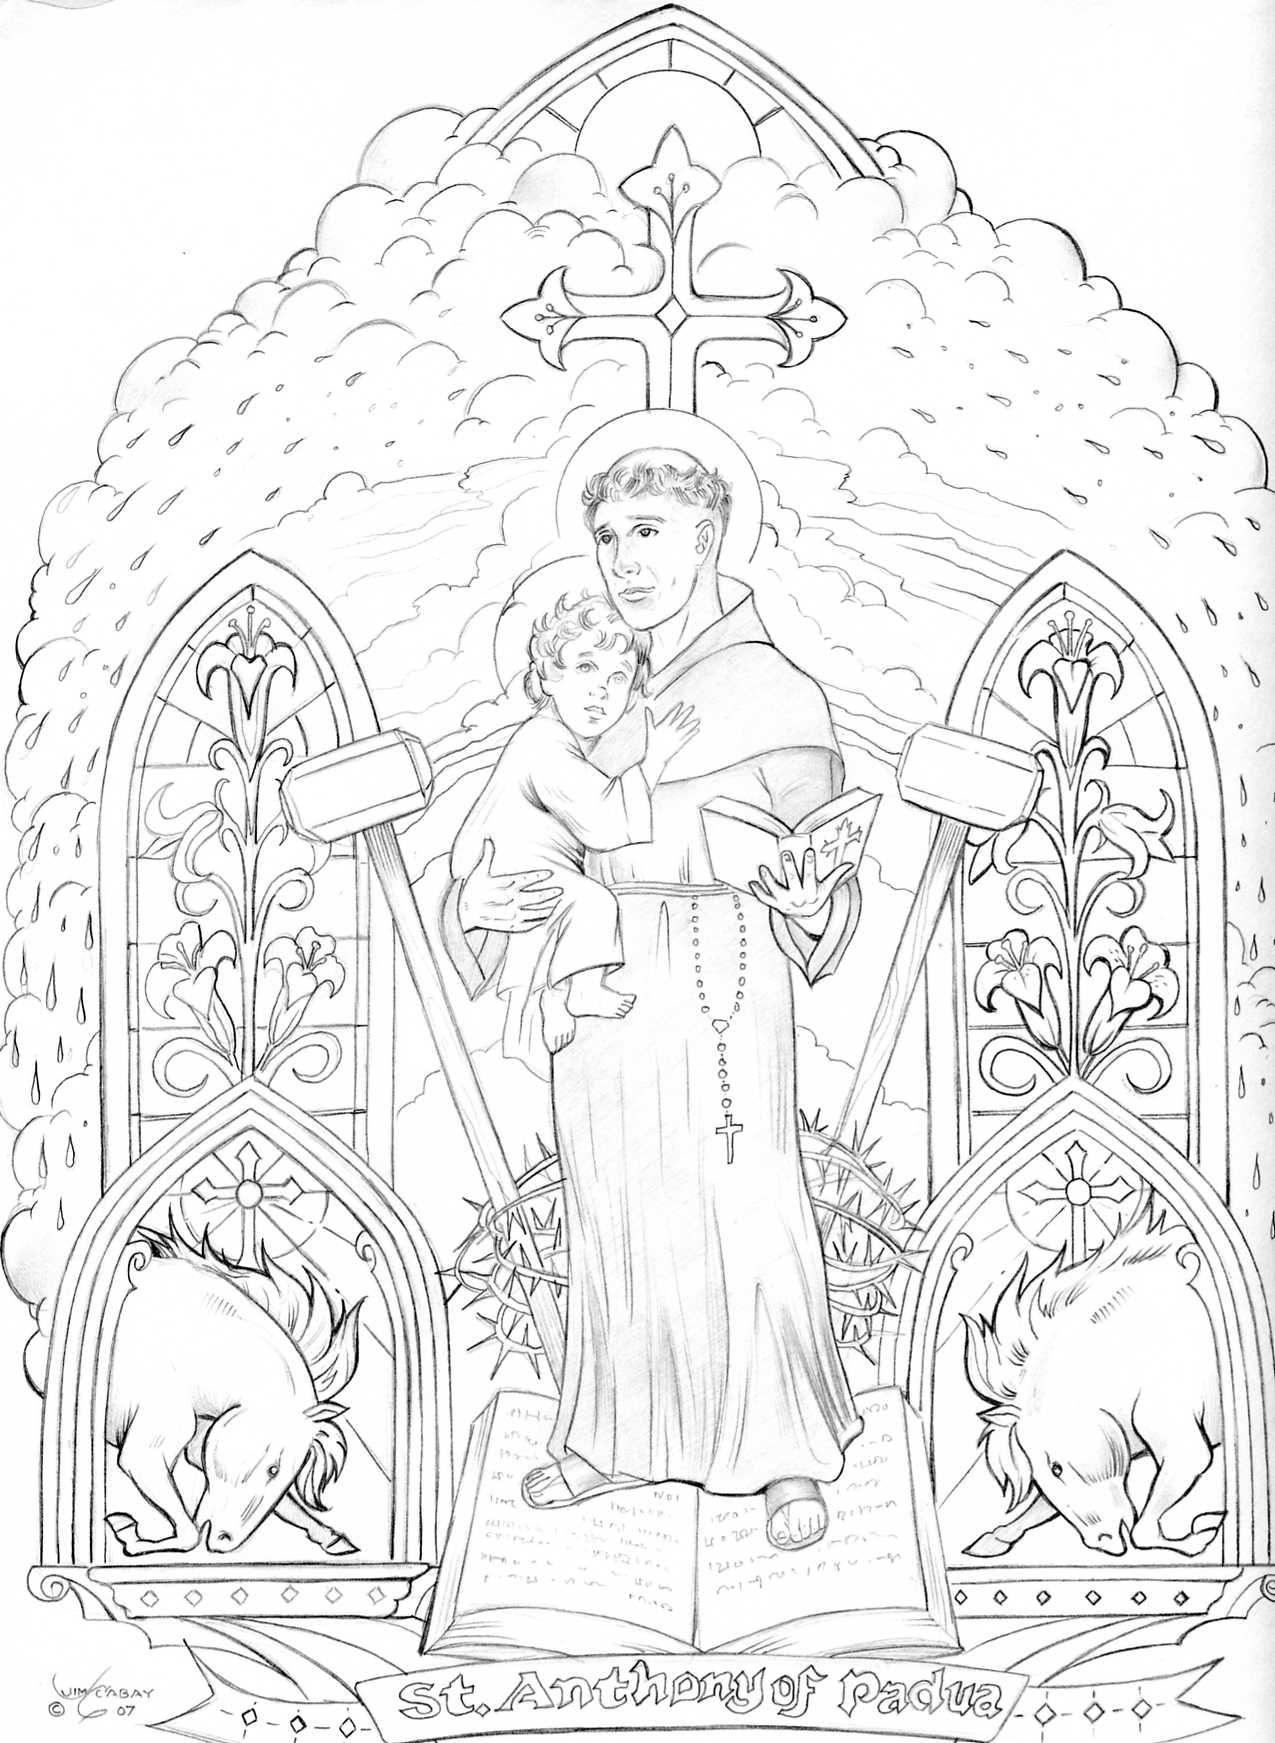 St anthony of padua coloring page coloring pages catholic coloring saint coloring